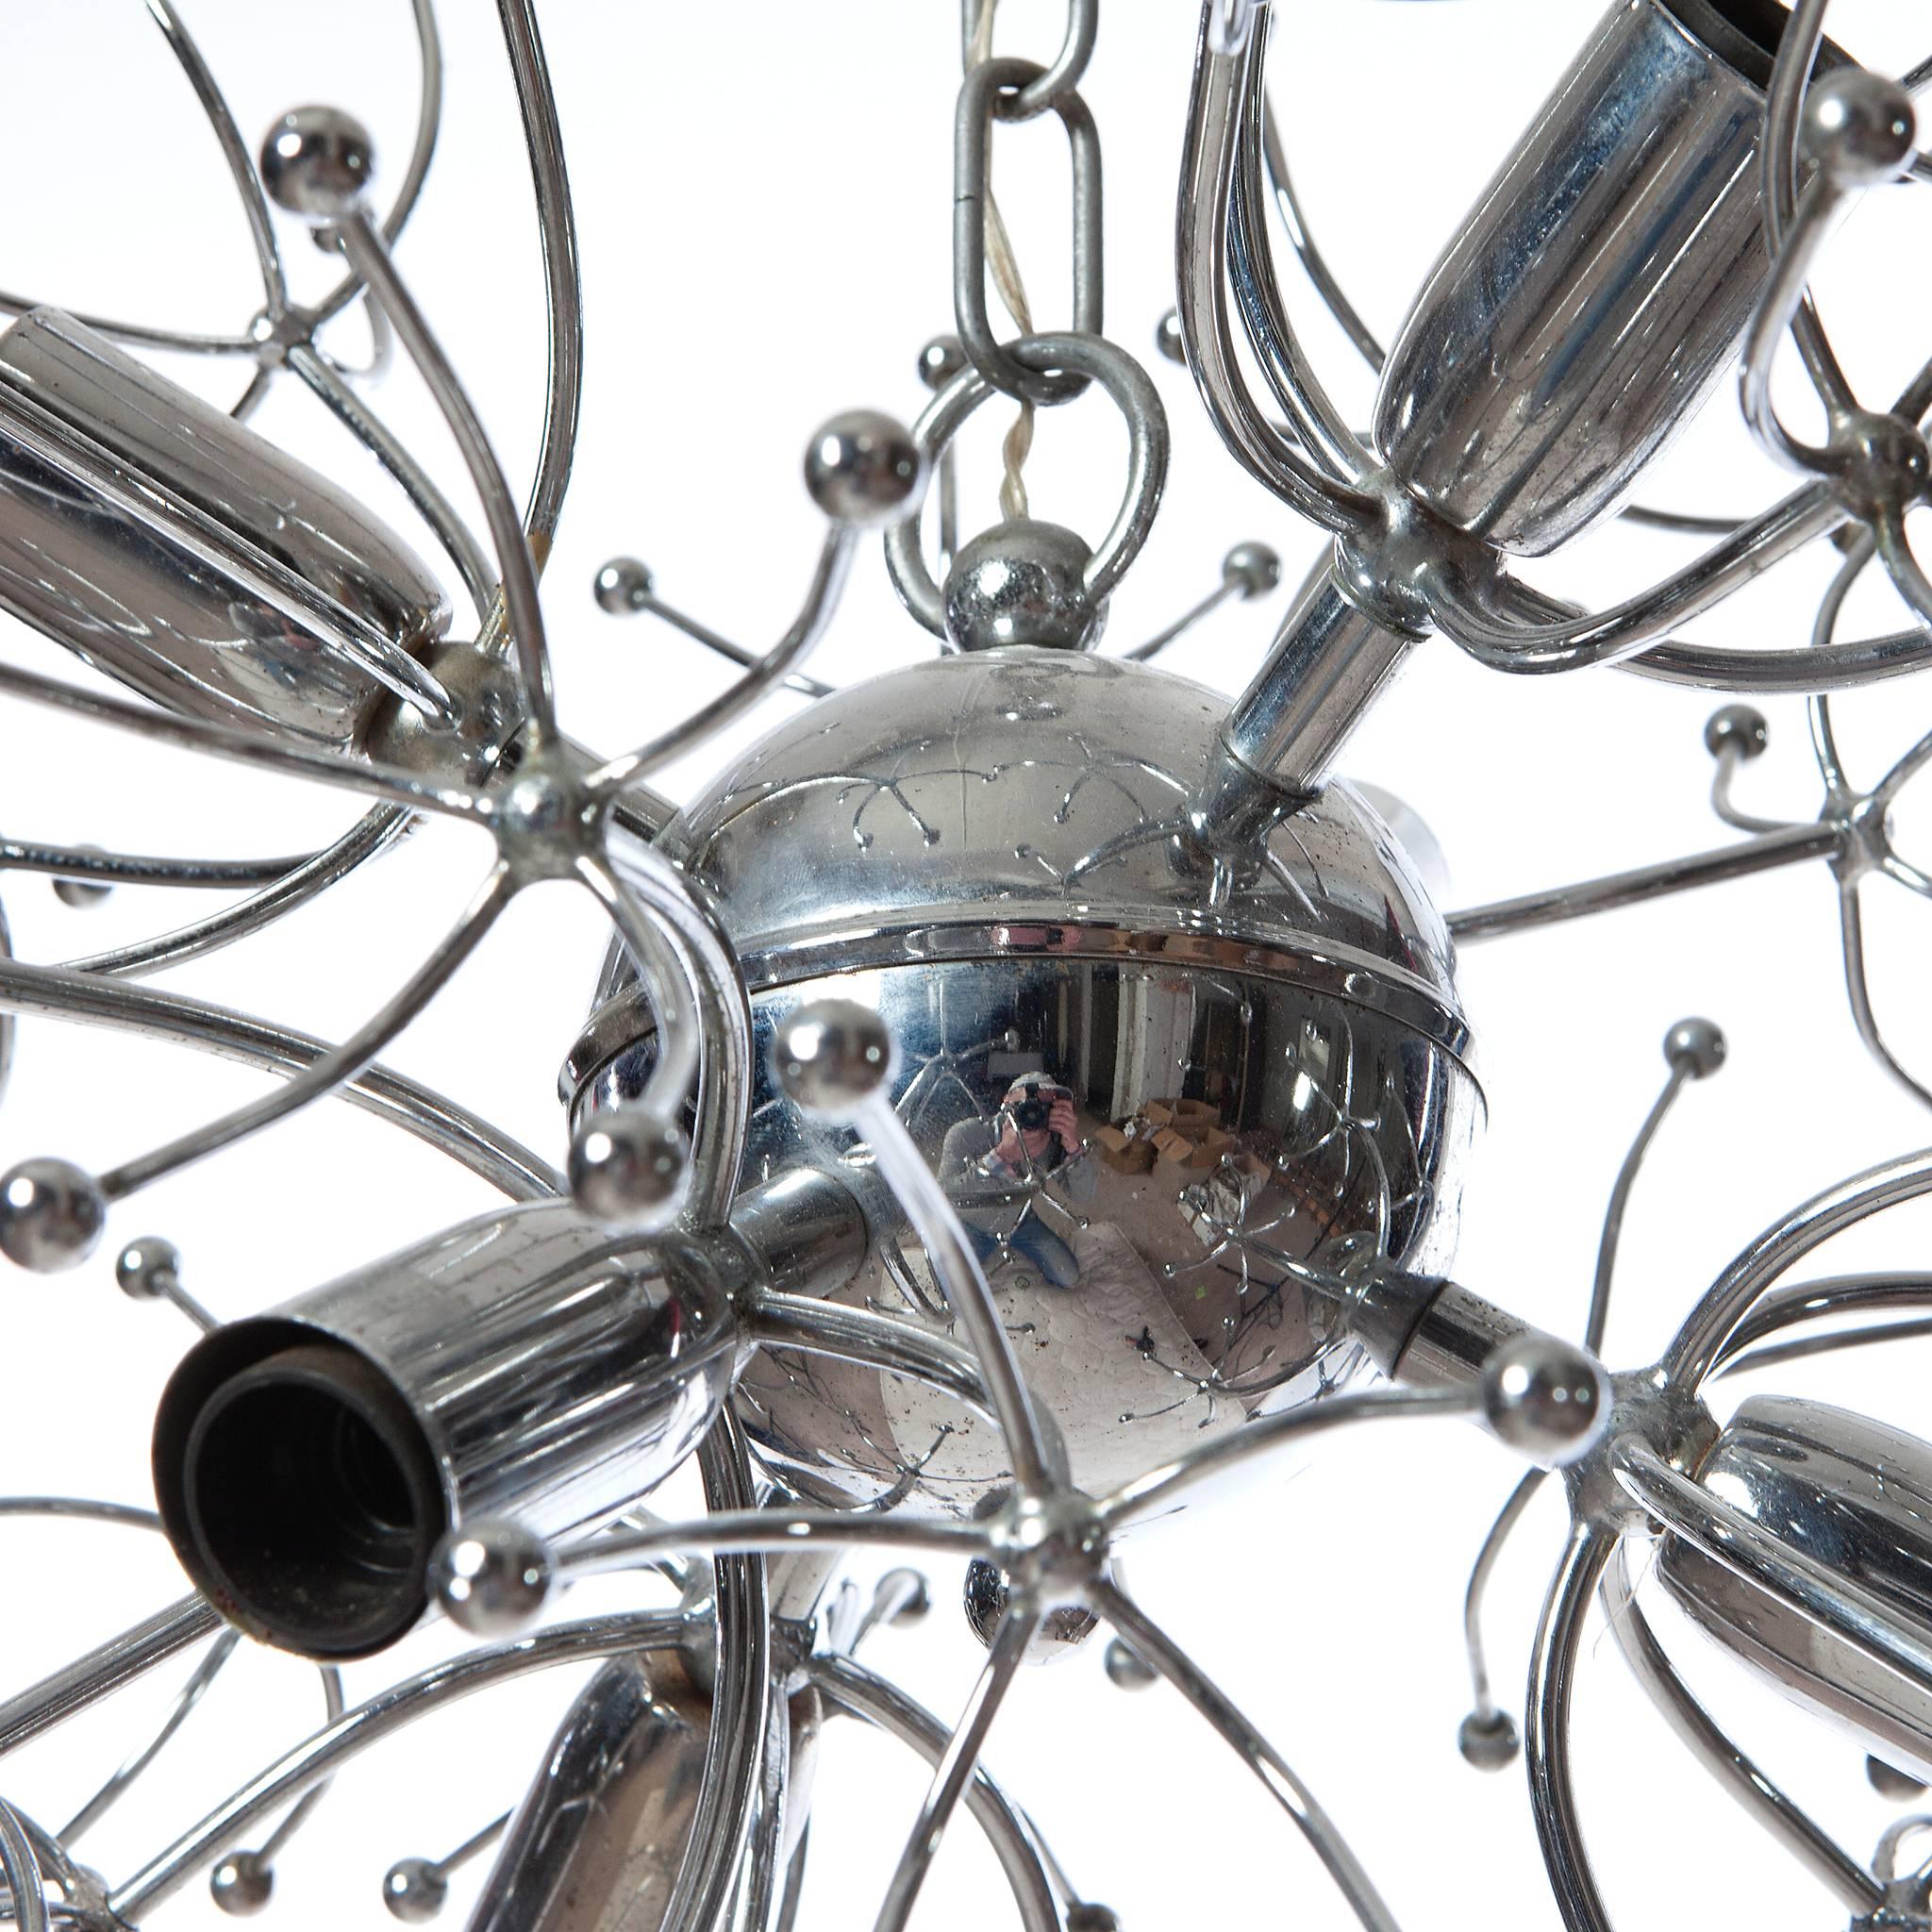 Sensational 1960's Sputnik chandelier by Gaetano Sciolari. The light starts with chrome bal with attached six stems containing a light bulb. Each stem has 5 smaller stems and again another 5 stems holding a little chrome ball at each end.
Please